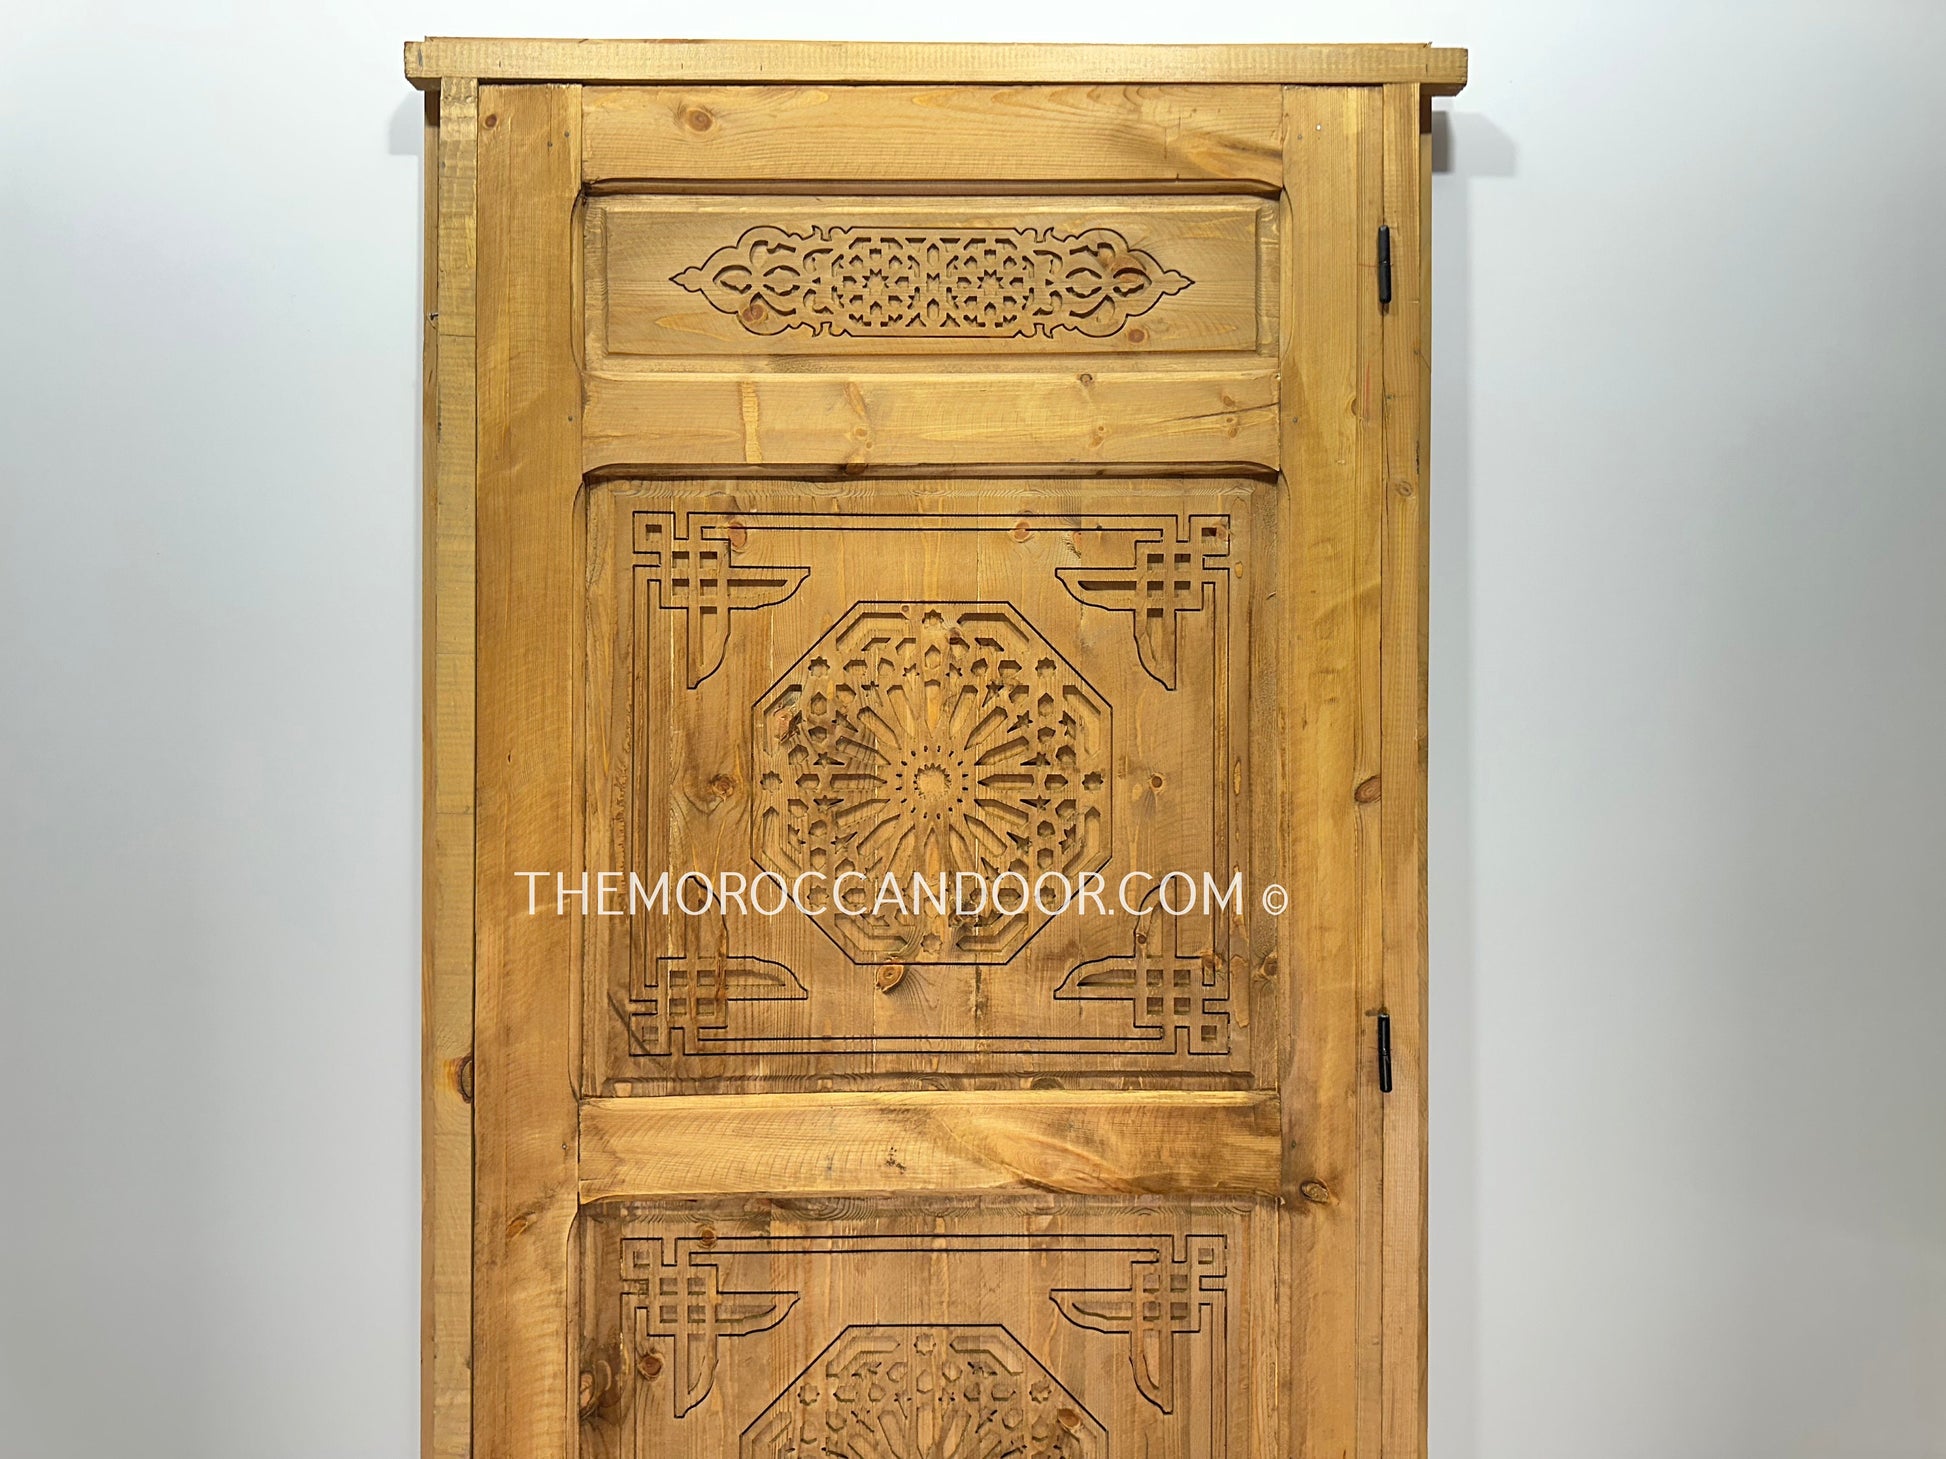 With a custom hand-carved door, carved wood, Moroccan wooden door, or handmade door, you may bring the magic of Morocco into your home.